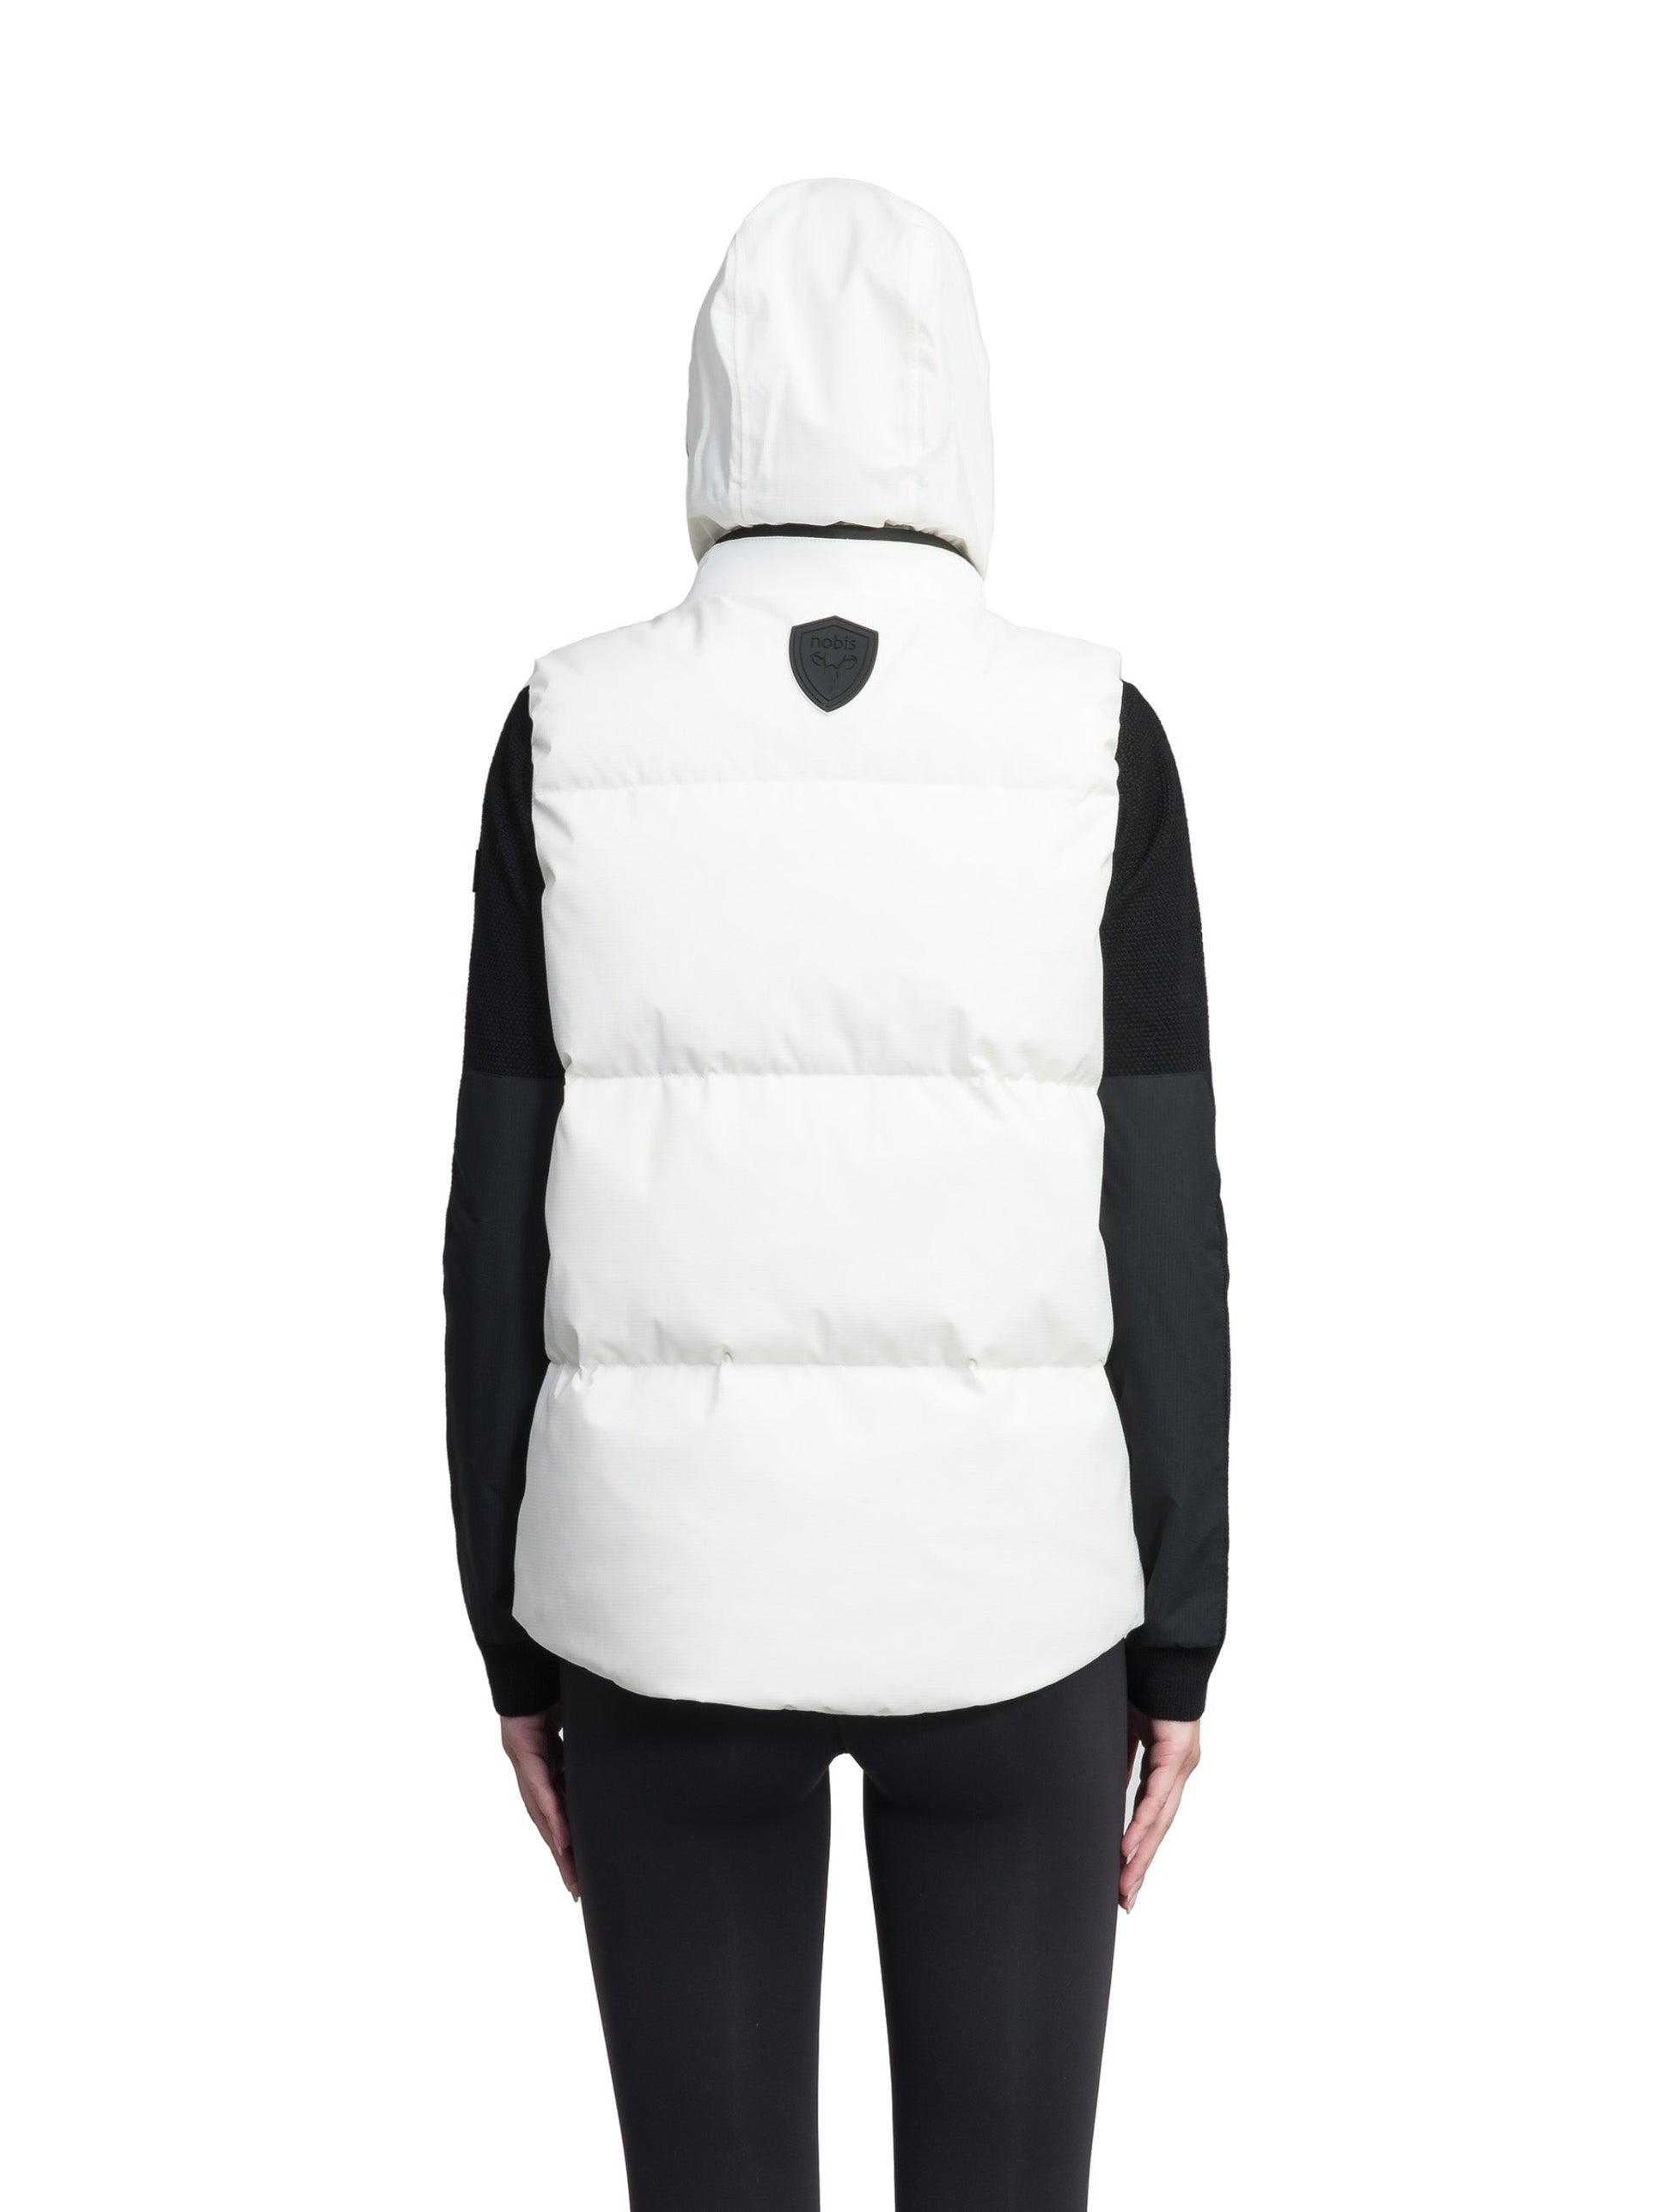 Oren Ladies Performance Vest in hip length, Durable Stretch Ripstop and 3-Ply Micro Denier fabrication, Premium Canadian White Duck Down insulation, tuck-away waterproof hood, and two-way centre front zipper, in Chalk